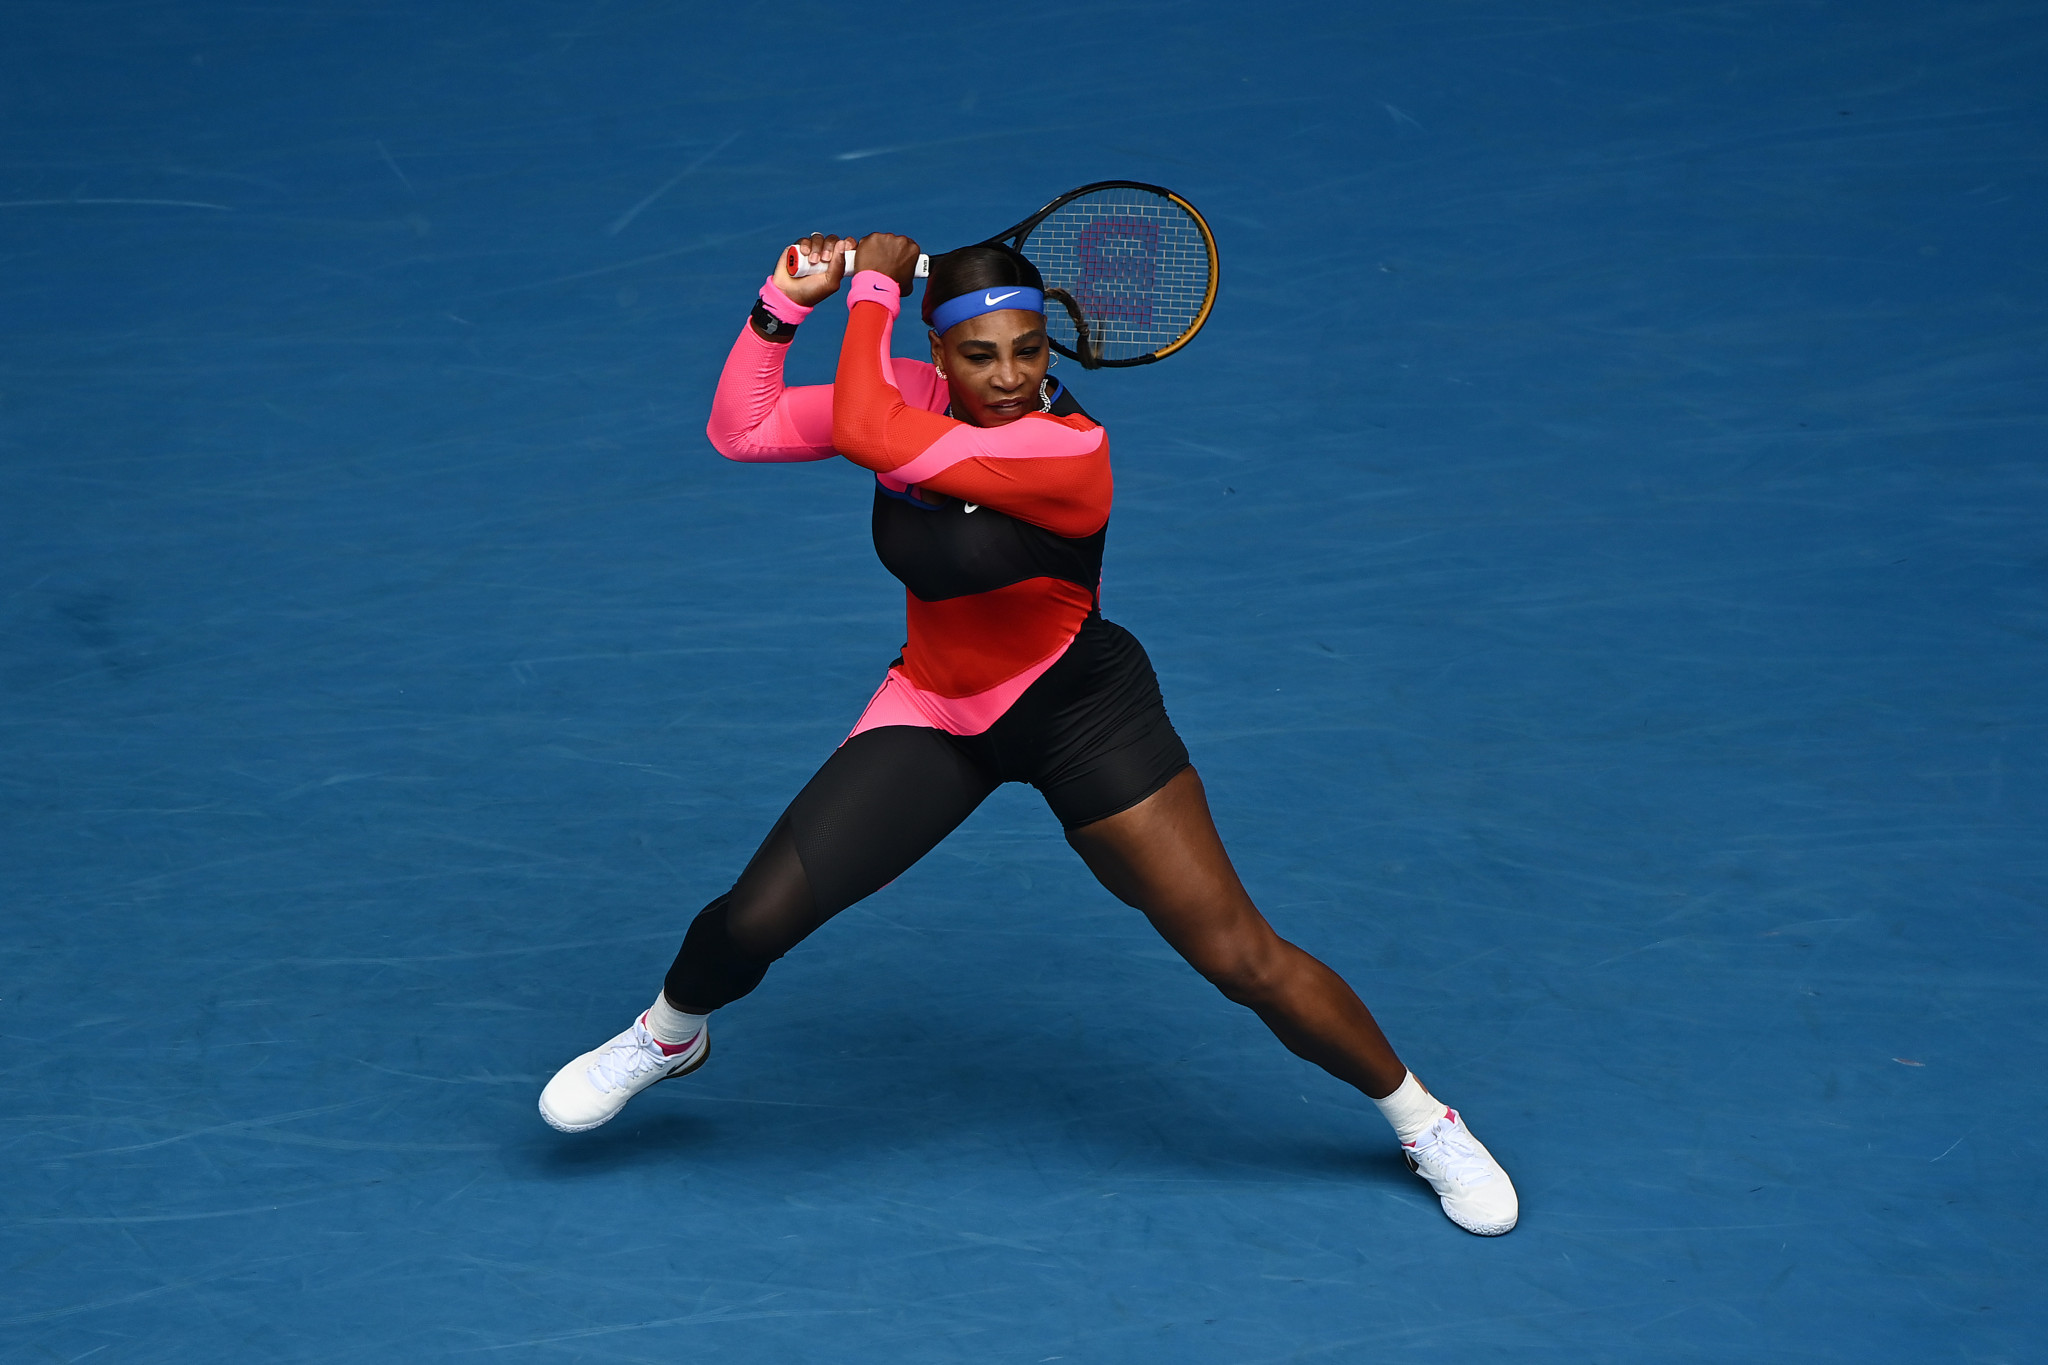 Serena Williams required less an hour to book her place in the second round of the Australian Open ©Getty Images